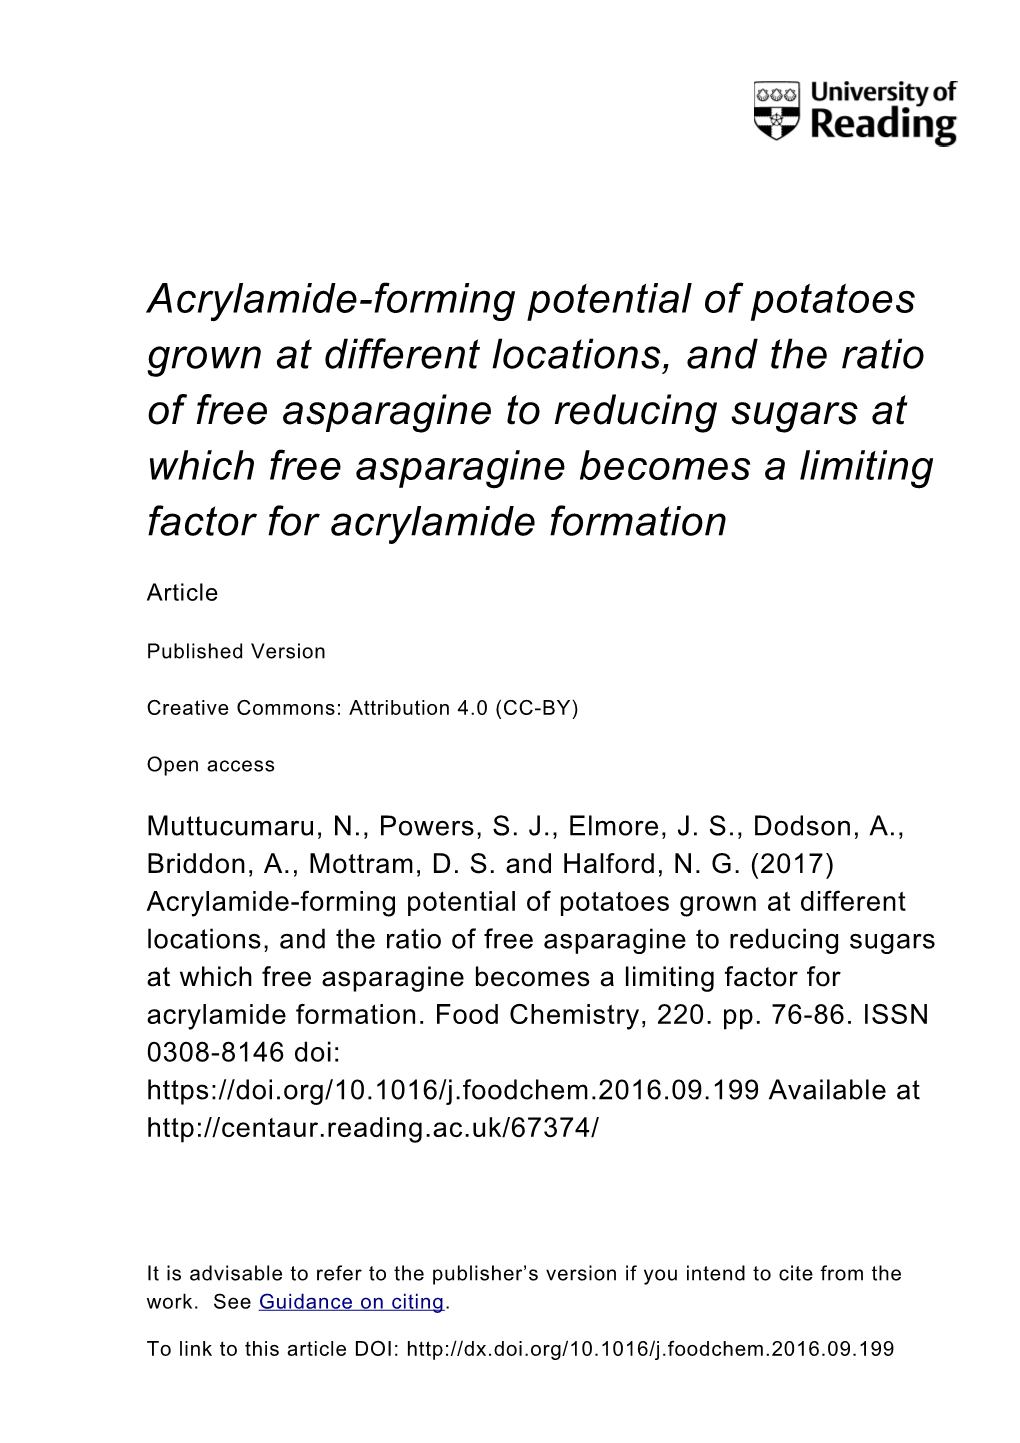 Acrylamide-Forming Potential of Potatoes Grown at Different Locations, and the Ratio of Free Asparagine to Reducing Sugars at Wh